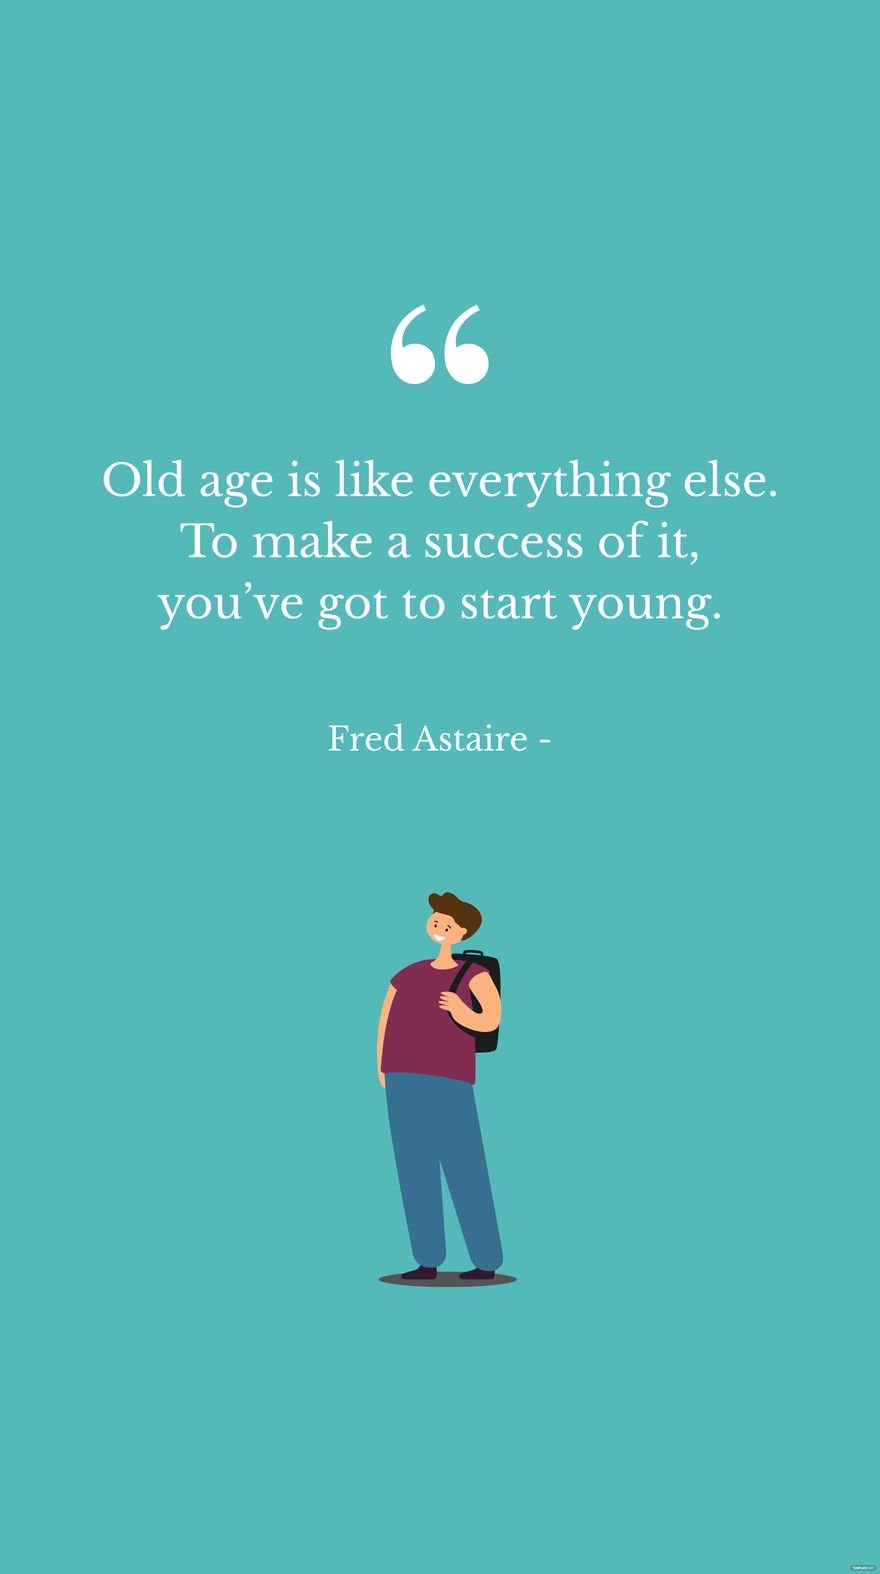 Fred Astaire - Old age is like everything else. To make a success of it, you’ve got to start young.